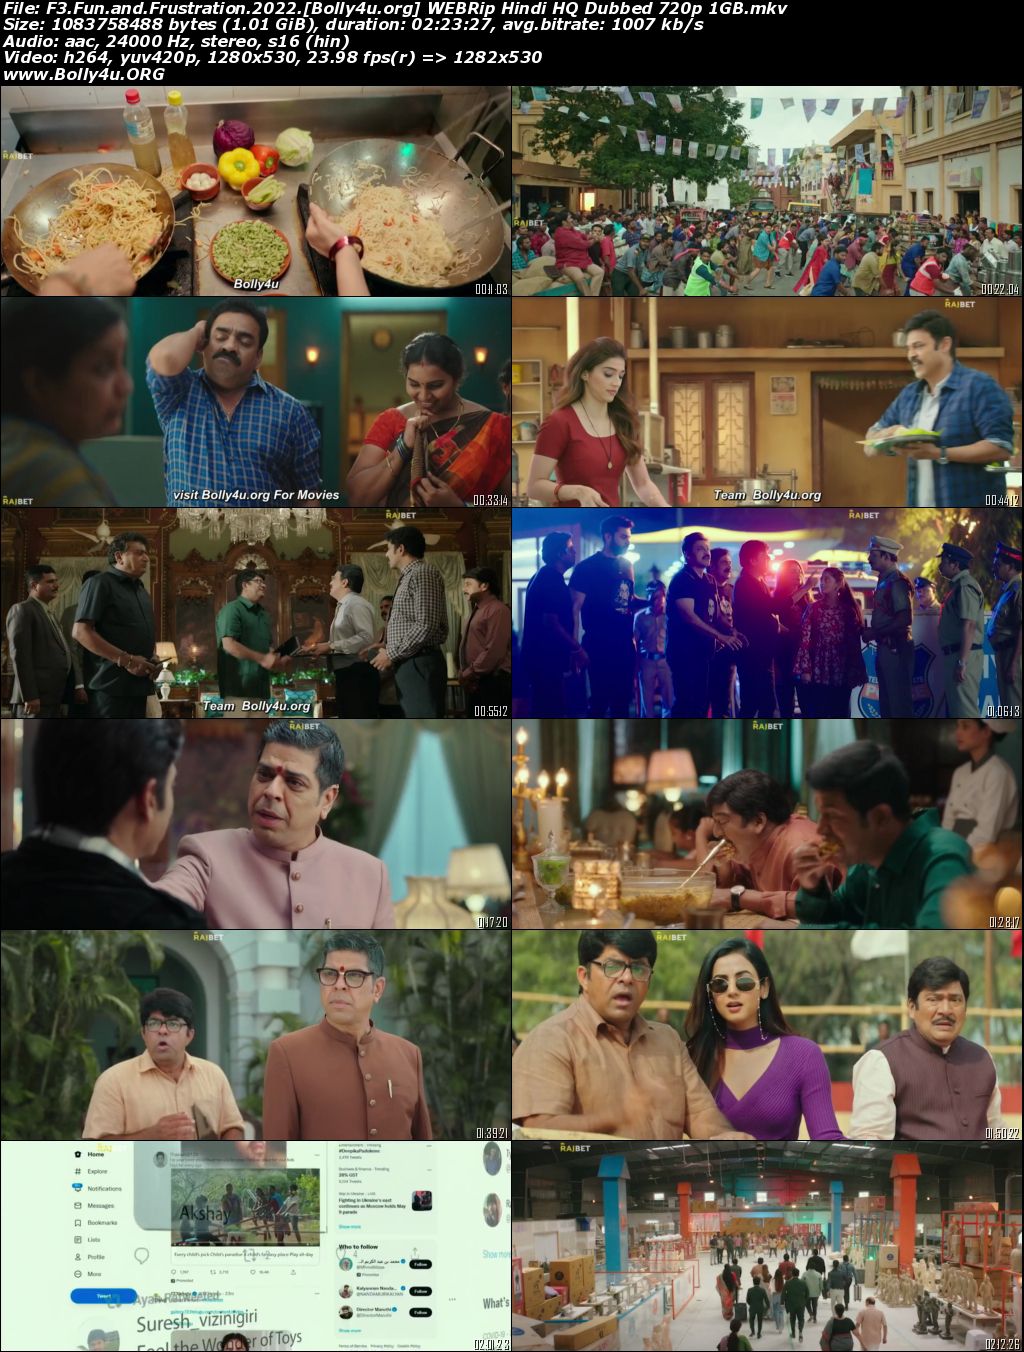 F3 Fun and Frustration 2022 WEBRip Hindi HQ Dubbed Full Movie Download